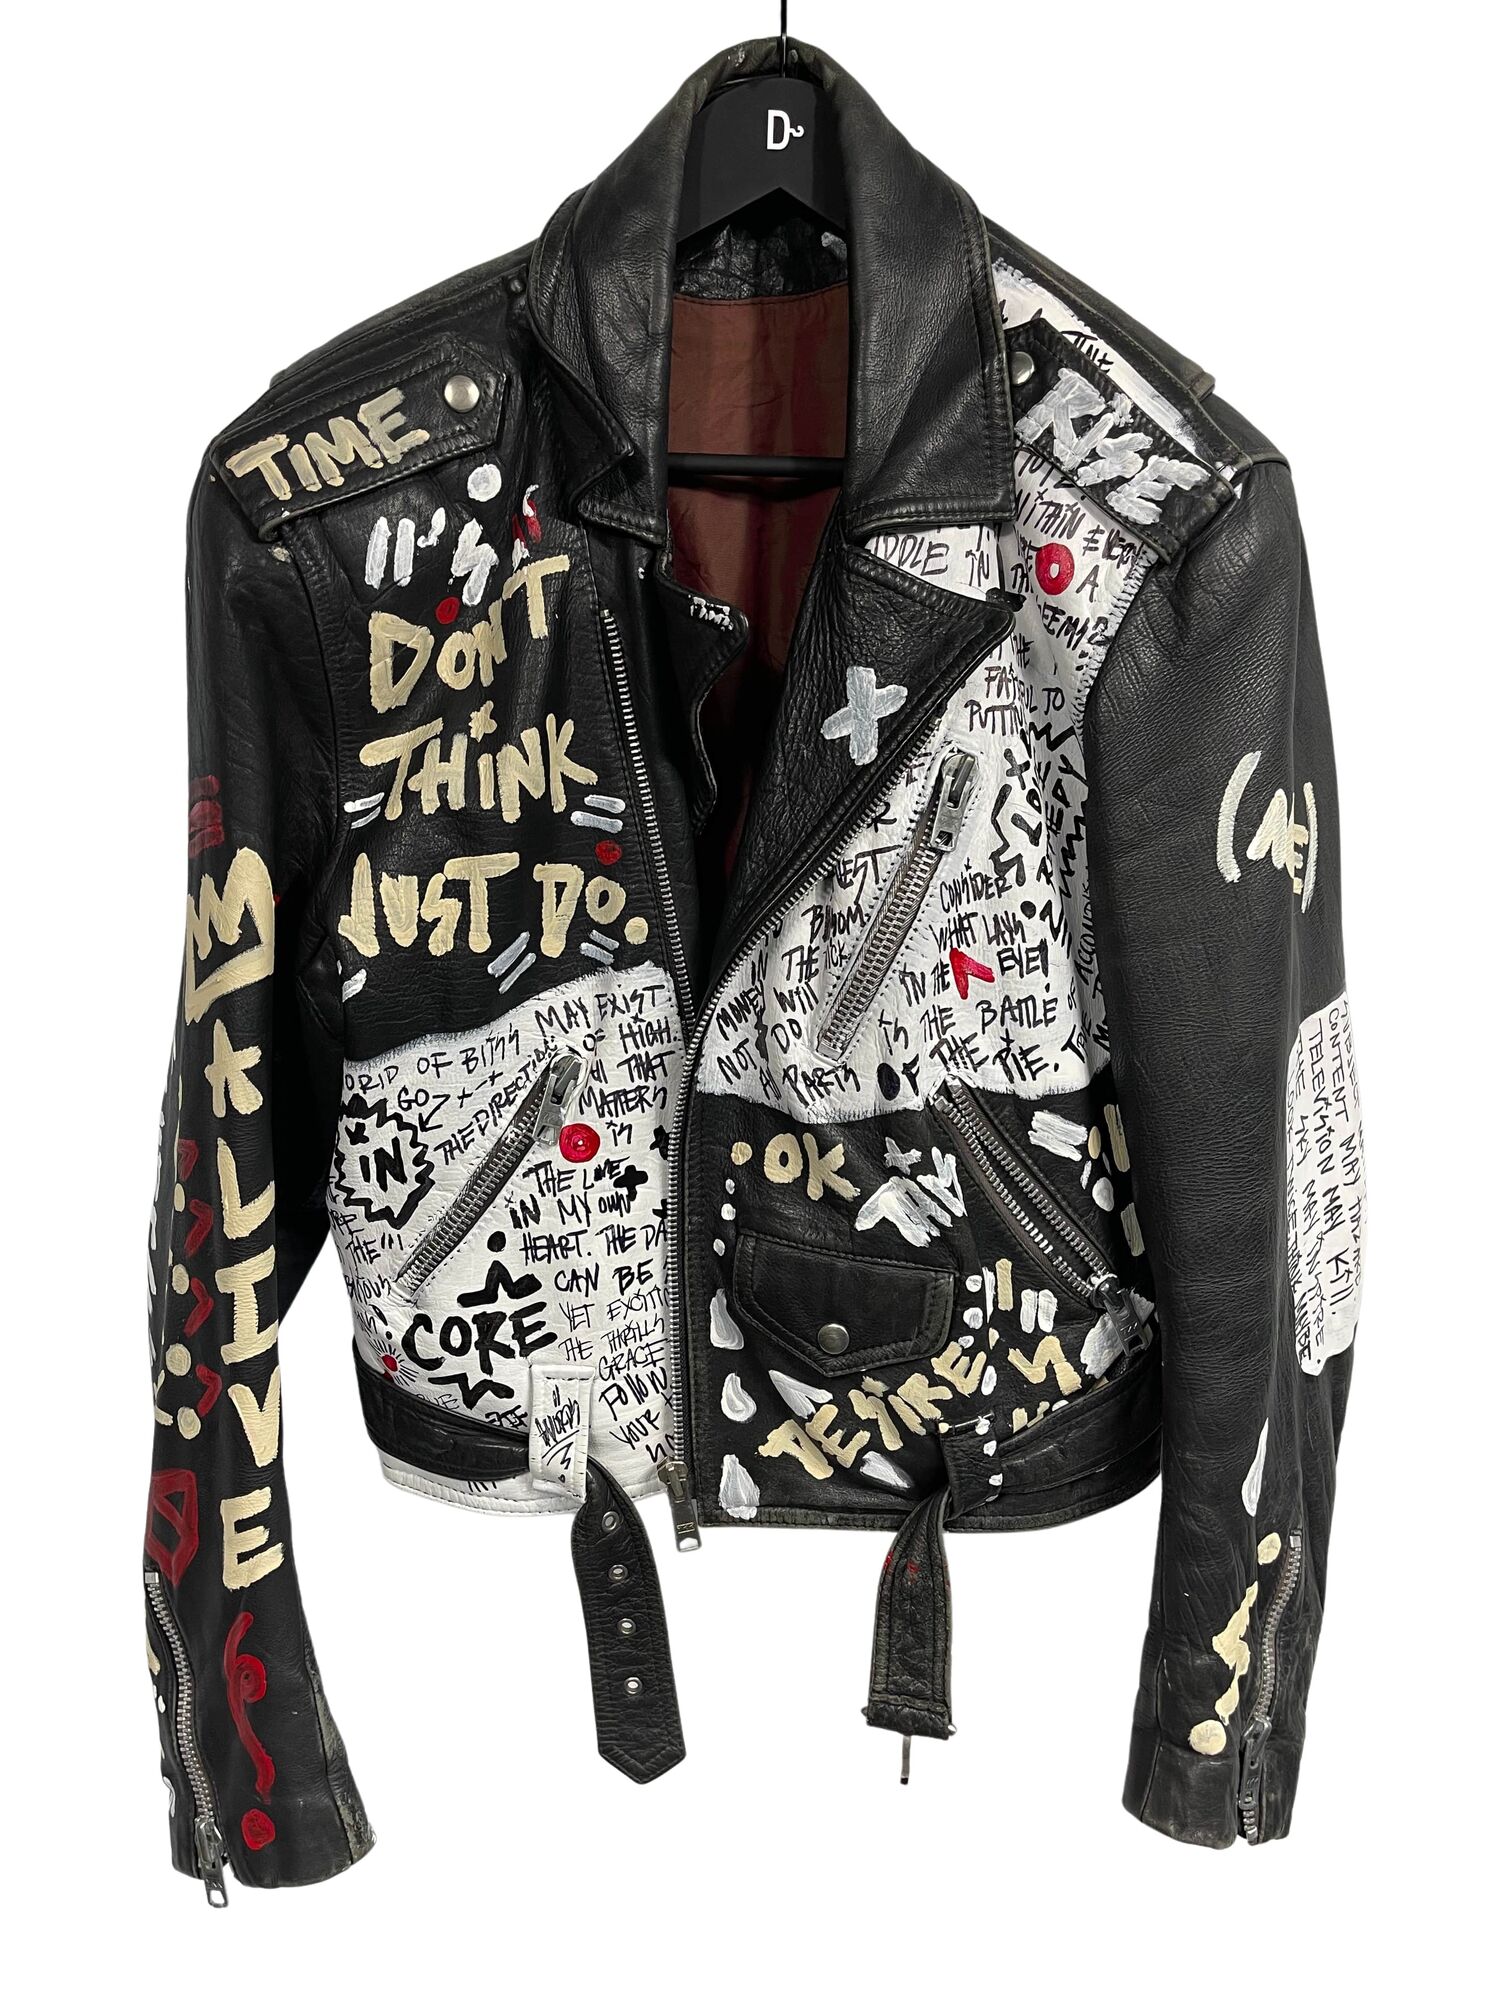 Graffiti-print leather biker jacket No brand - S, buy pre-owned at 280 EUR